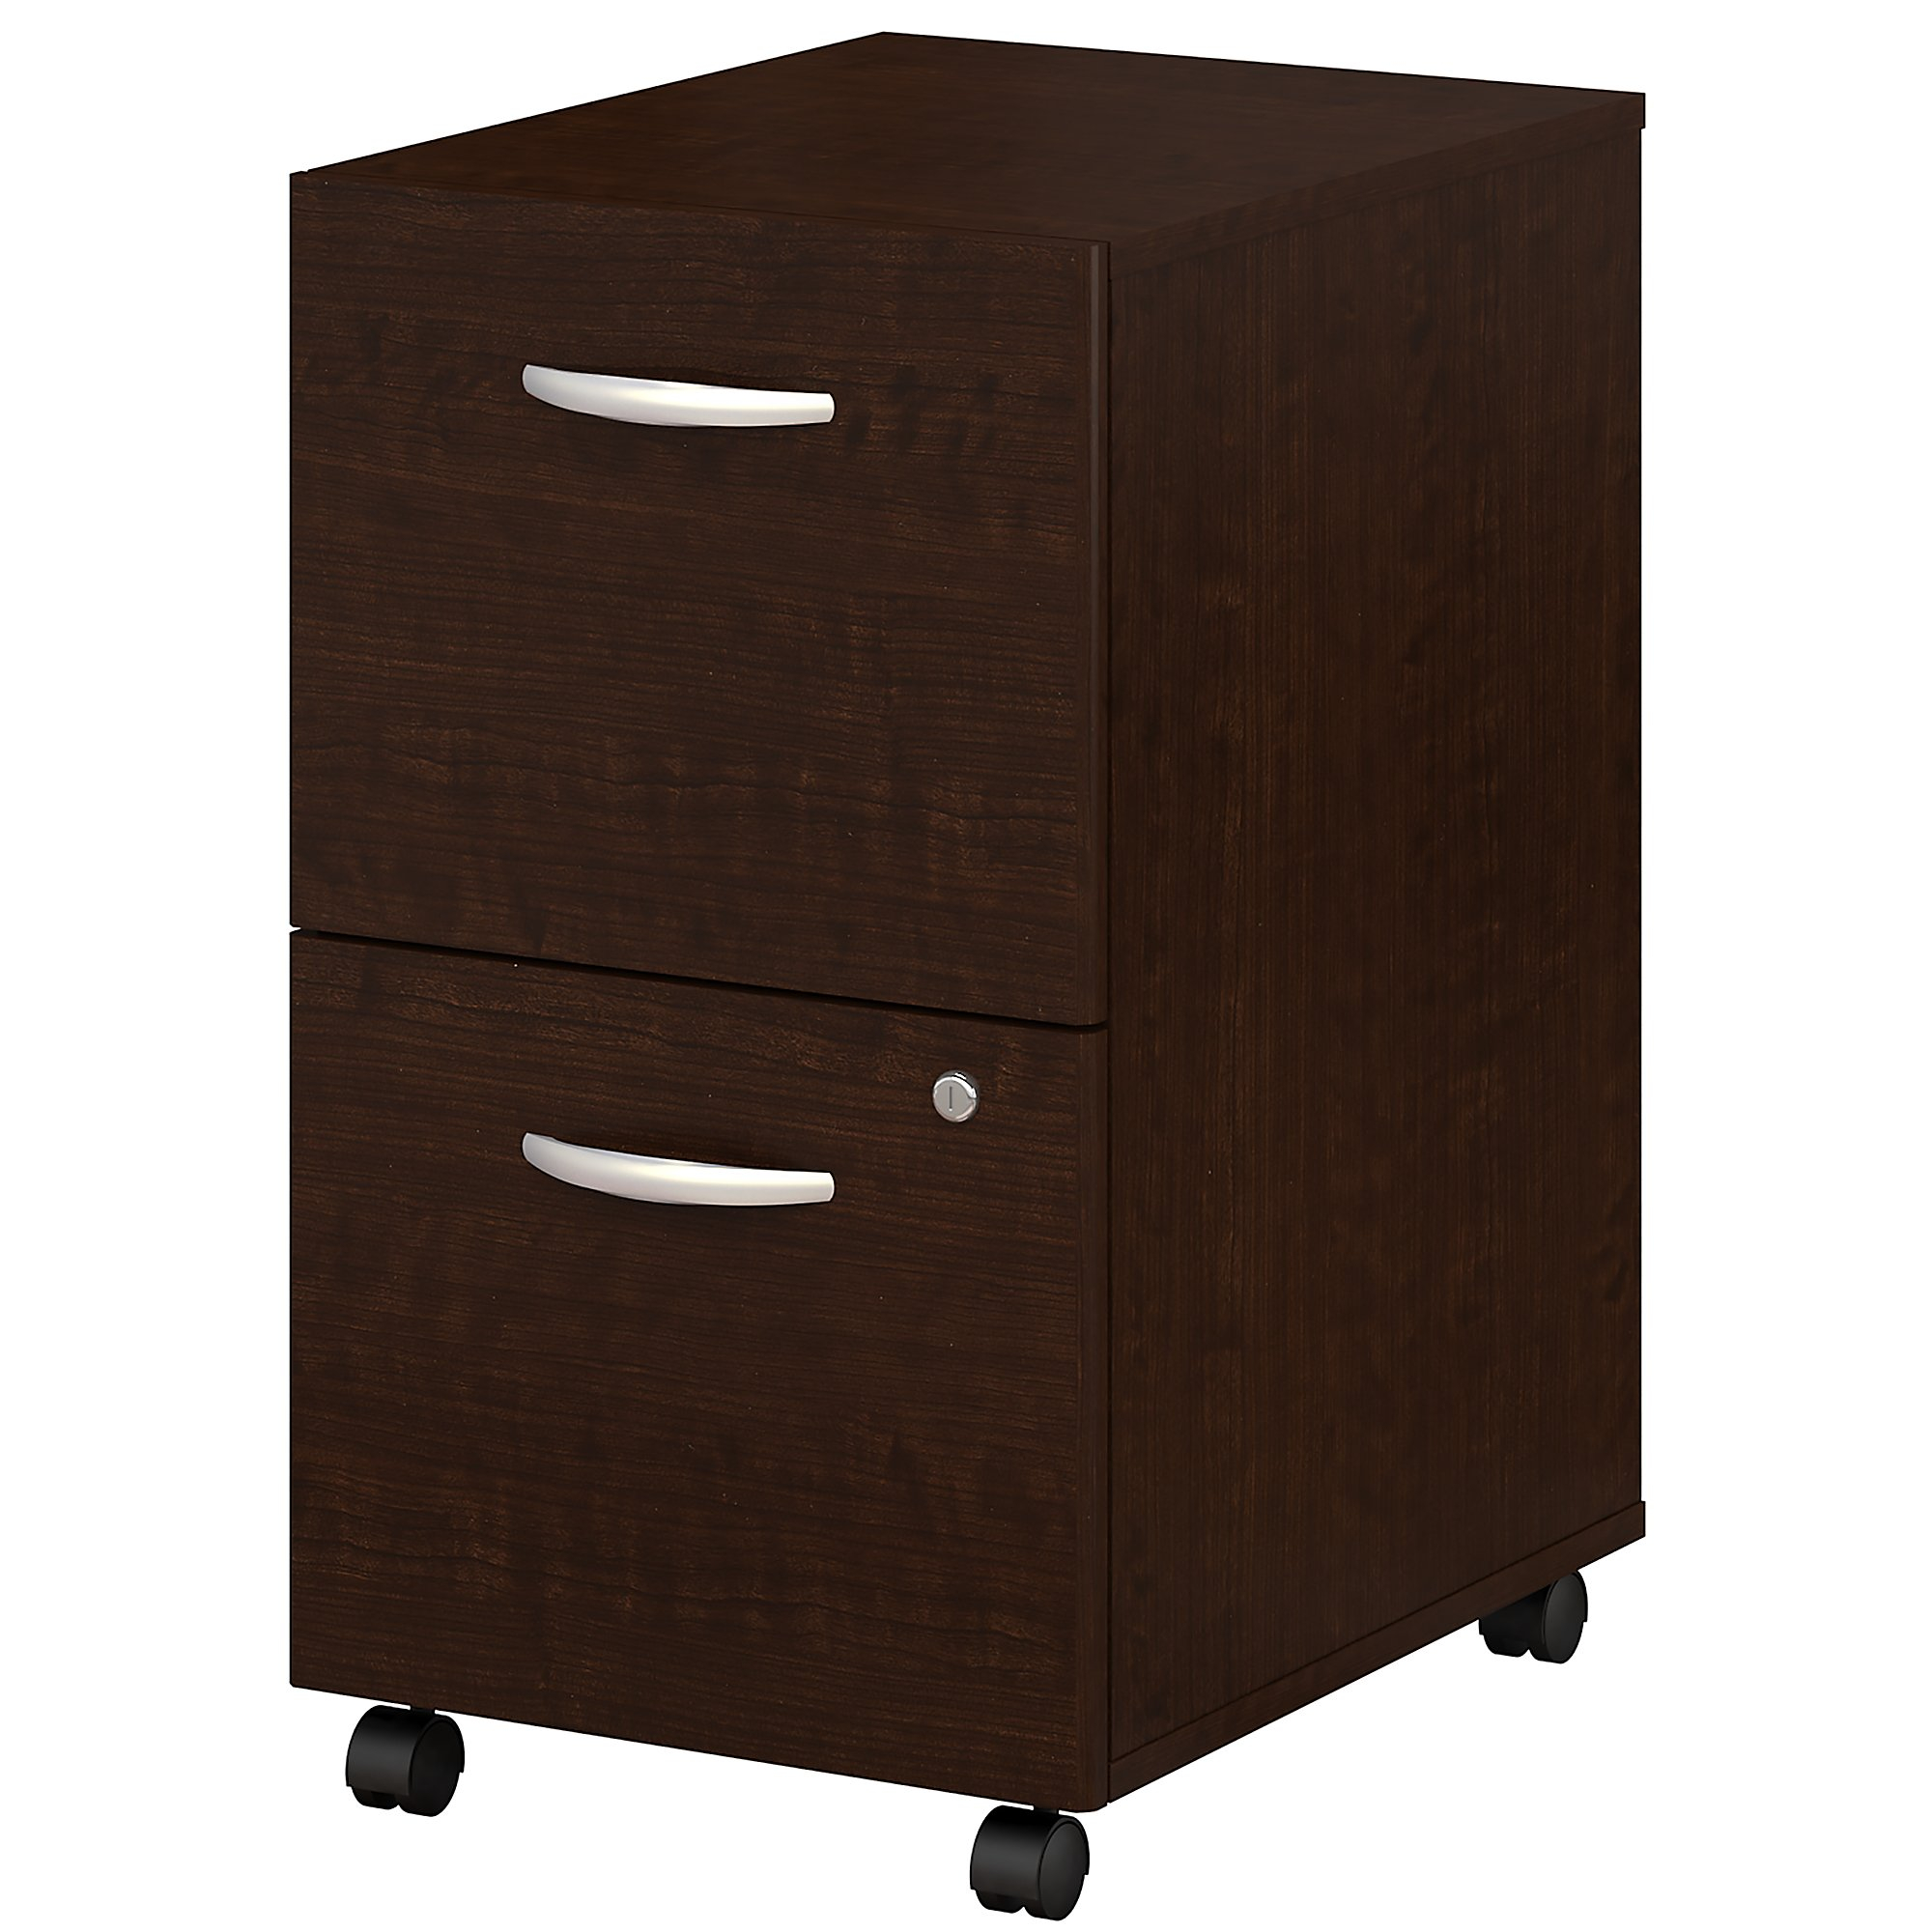 Classic Shell Desk 2 Drawer Filing Storage Mobile Pedestal File in size 2000 X 2000